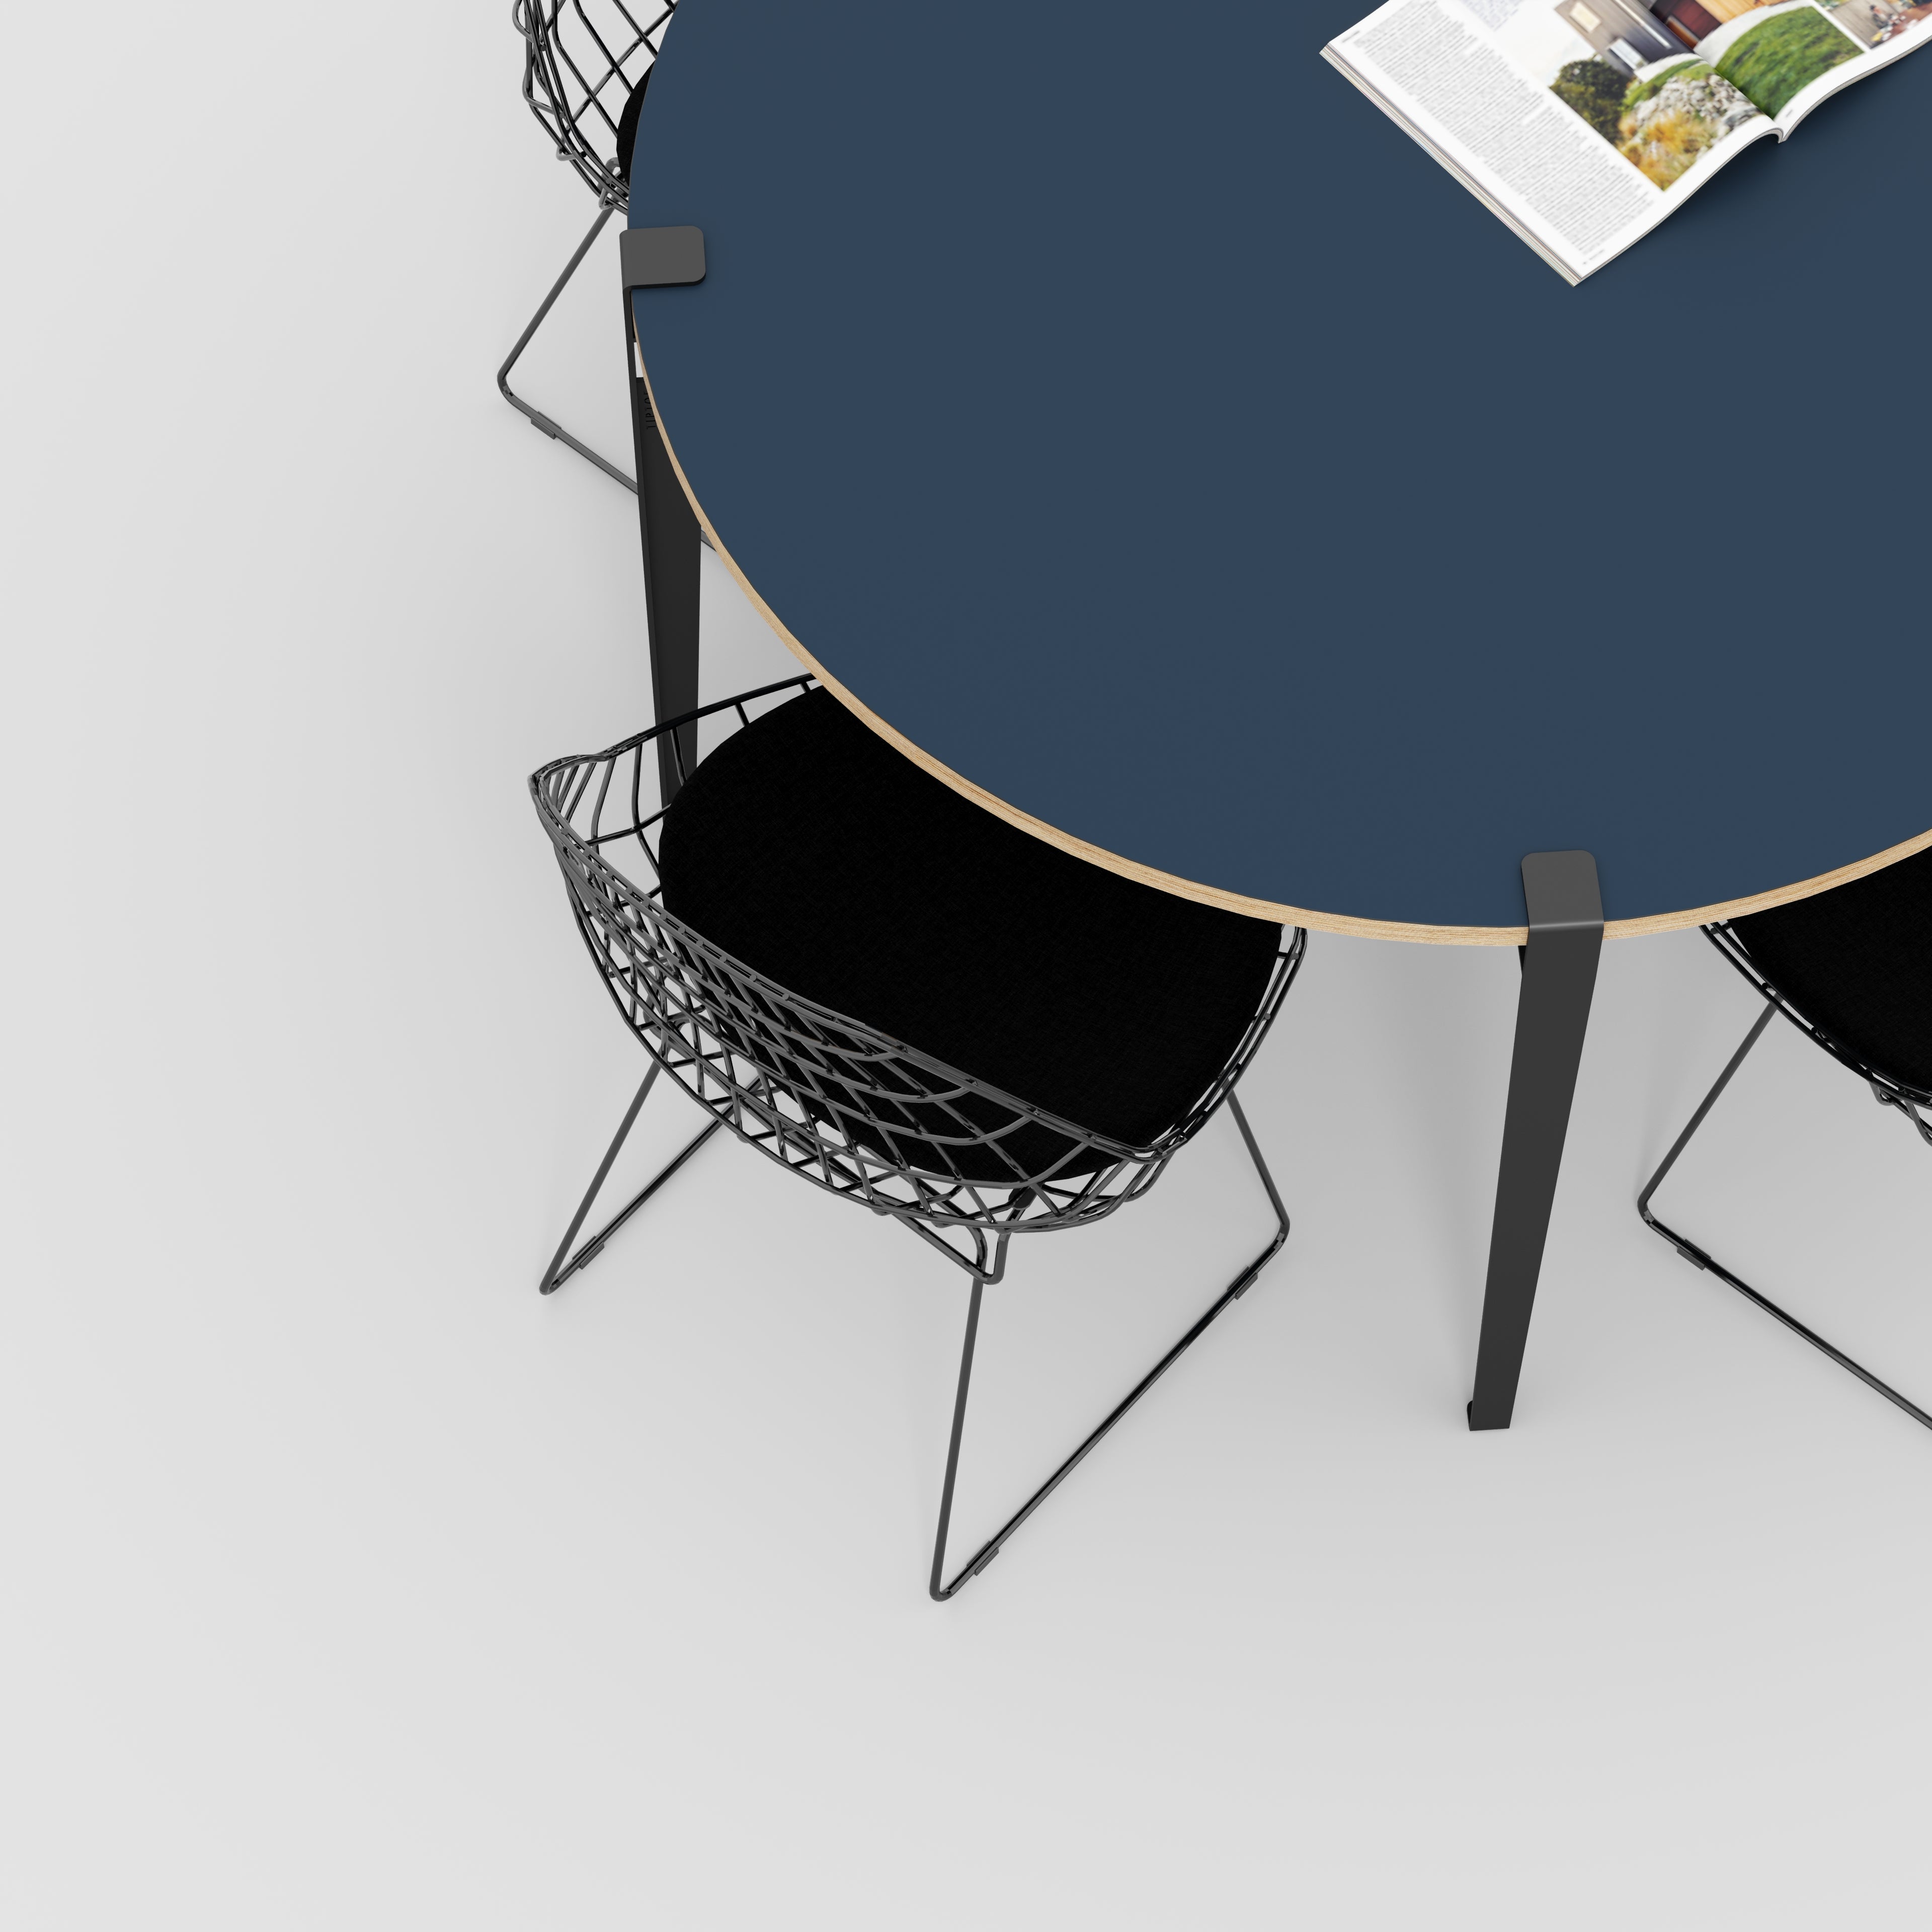 Round Table with Black Tiptoe Legs - Formica Night Sea Blue - 1200(dia) x 750(h)